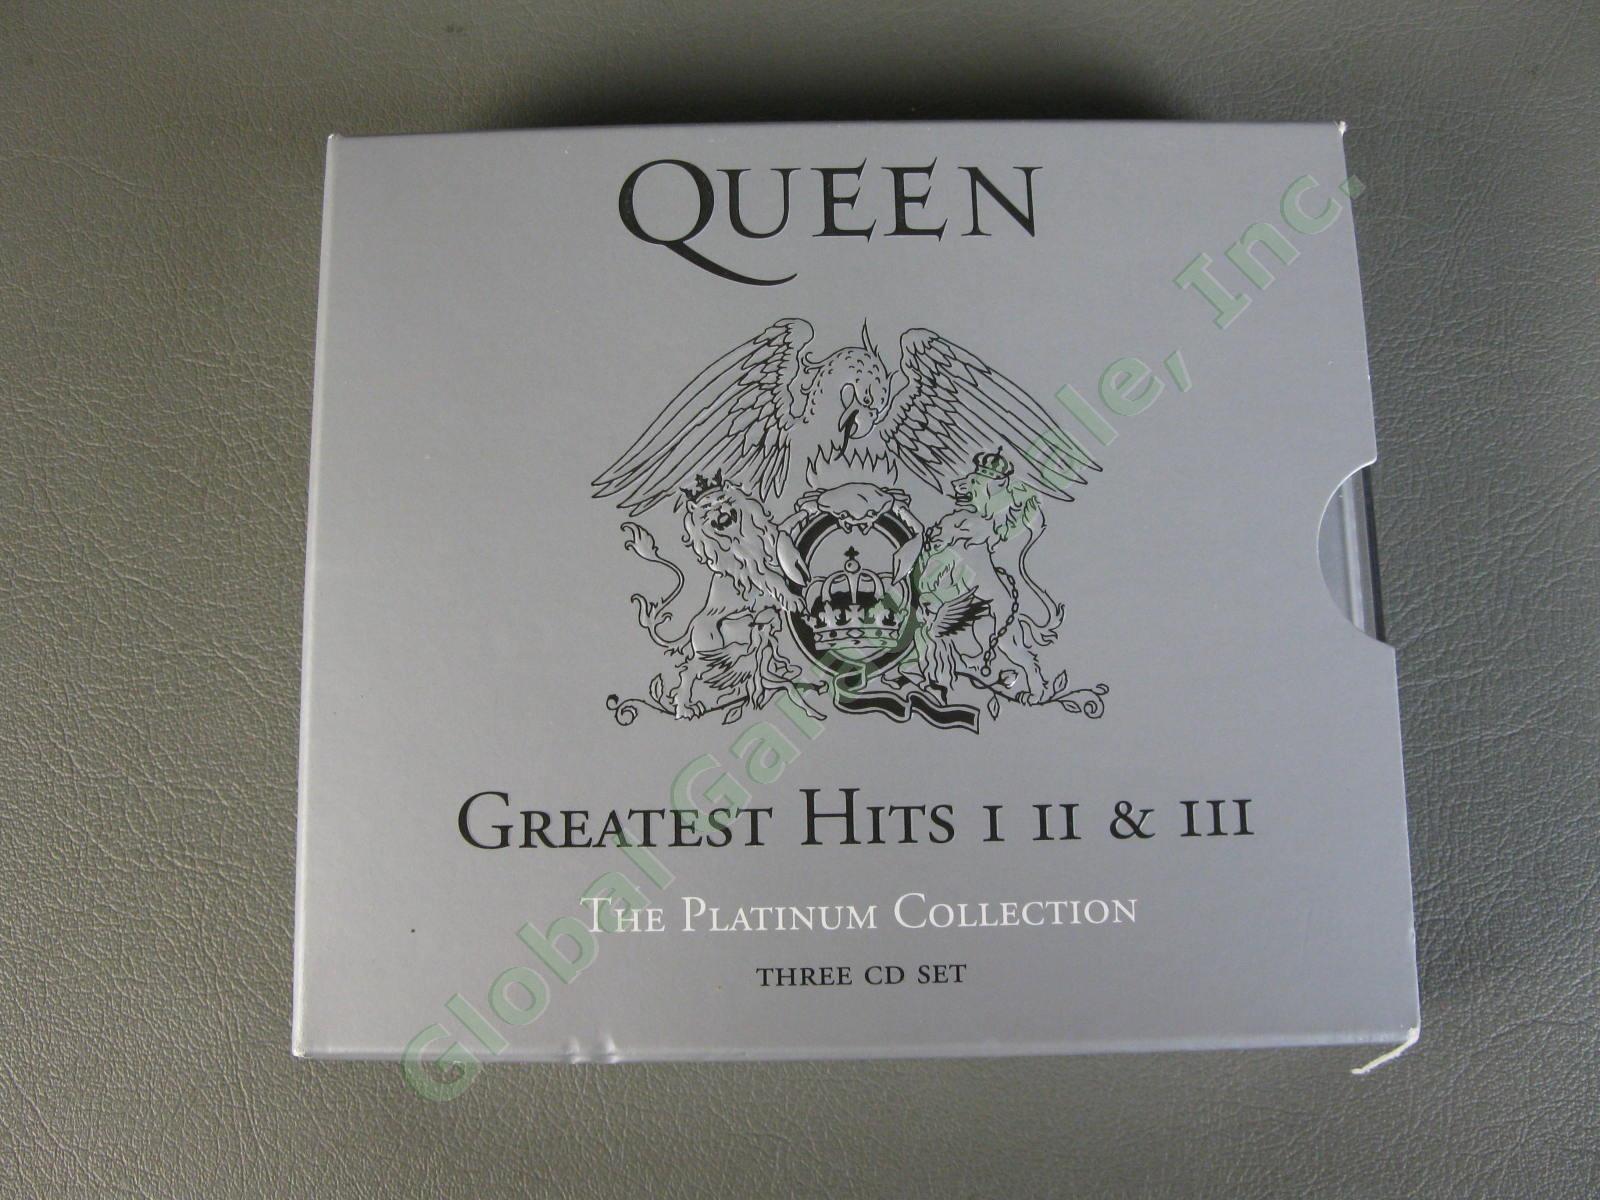 Queen Greatest Hits I II & III The Platinum Collection 3 CD Set Classic Rock NR